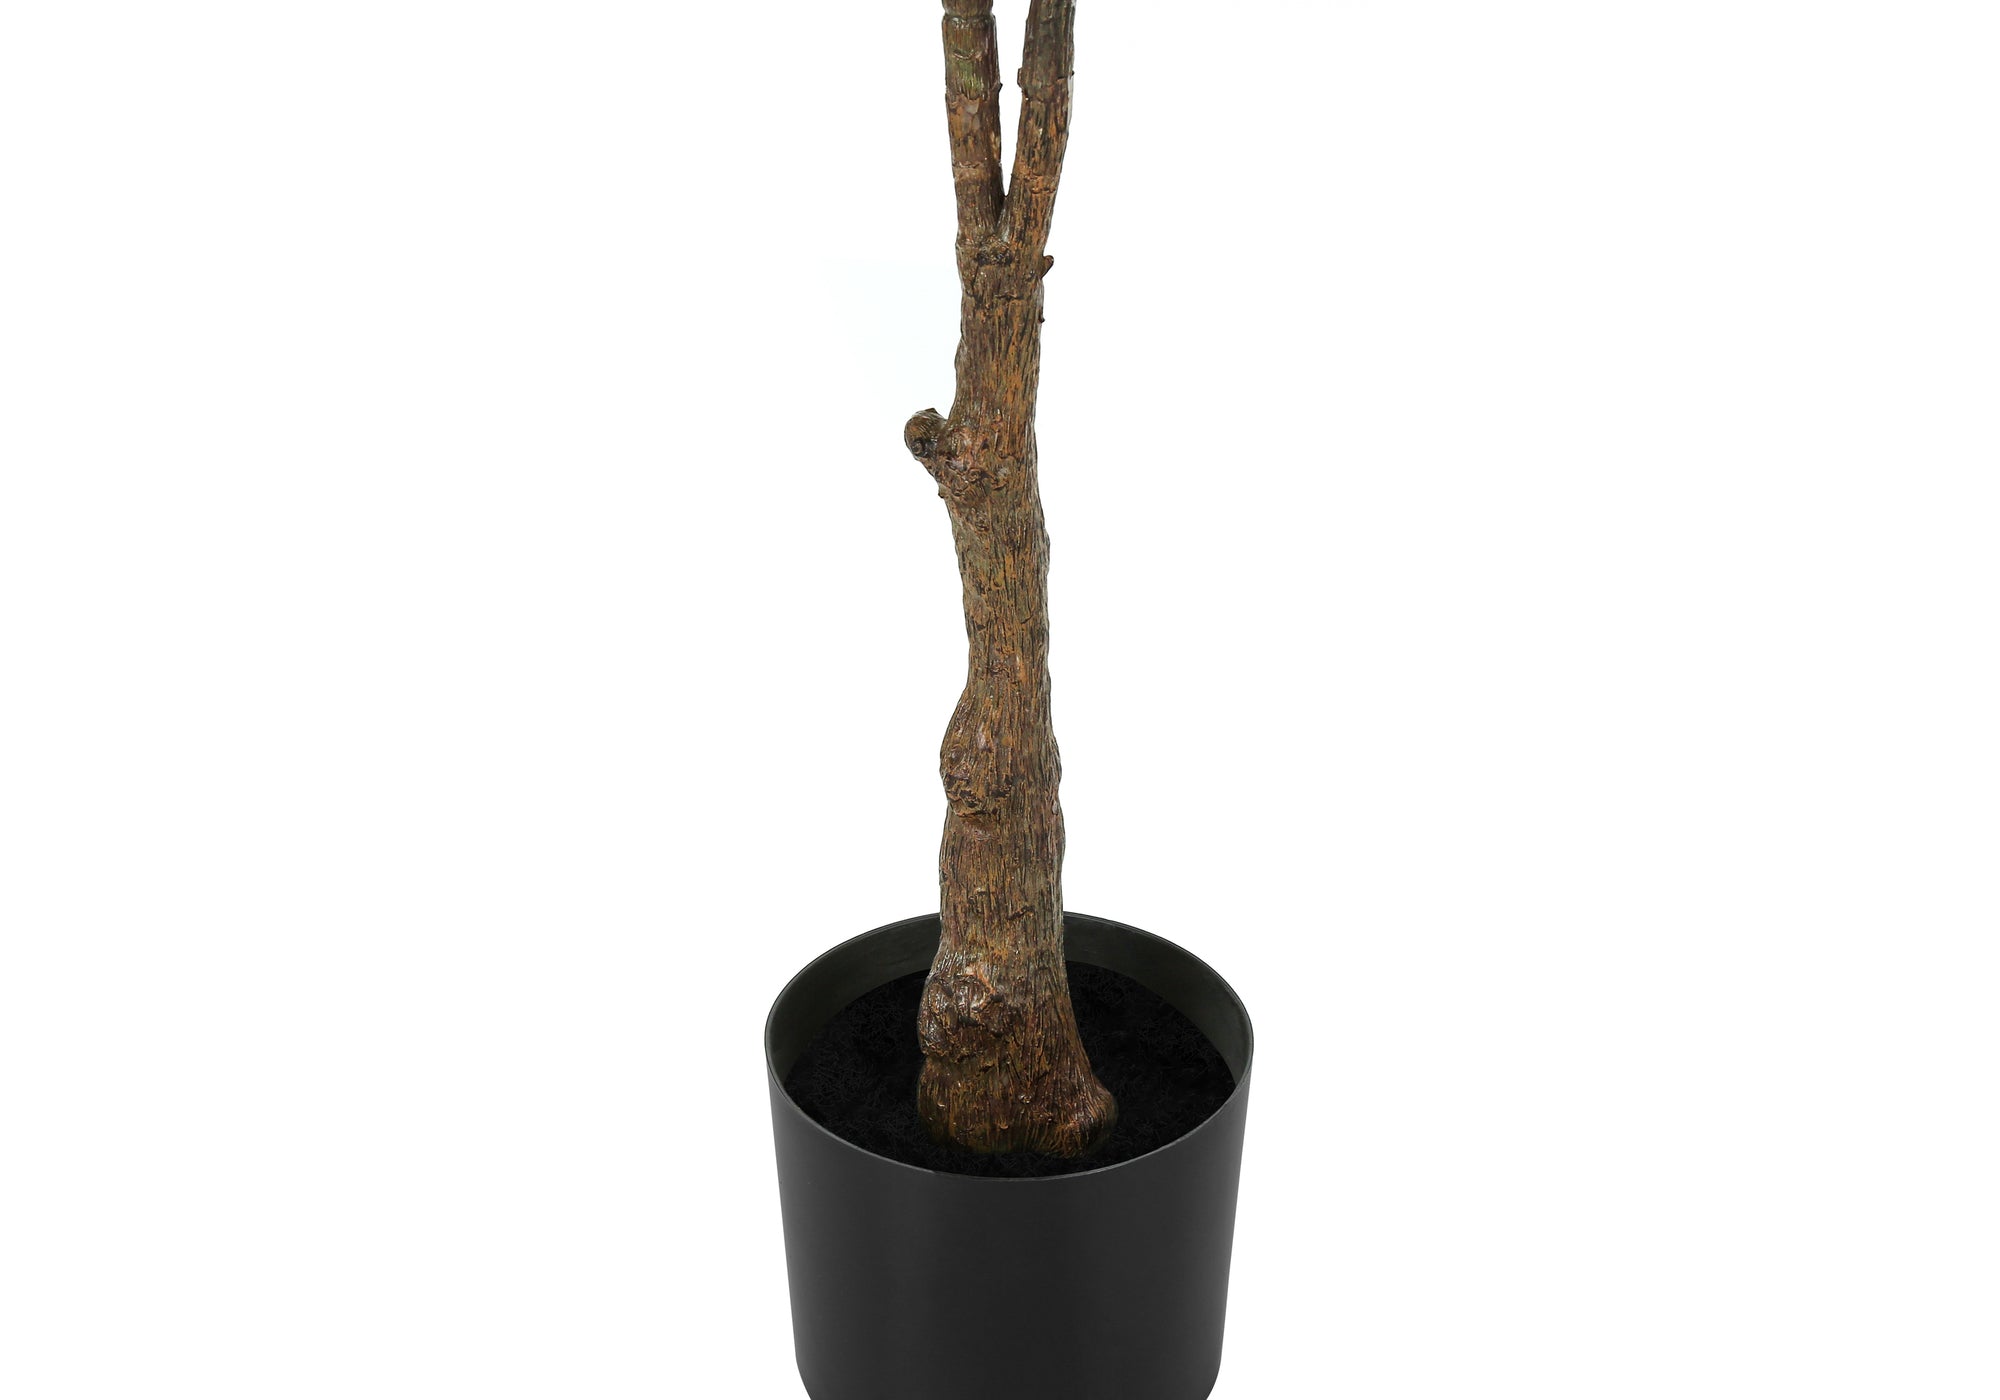 MN-359514    Artificial Plant, 52" Tall, Rubber Tree, Indoor, Faux, Fake, Floor, Greenery, Potted, Real Touch, Decorative, Green Leaves, Black Pot